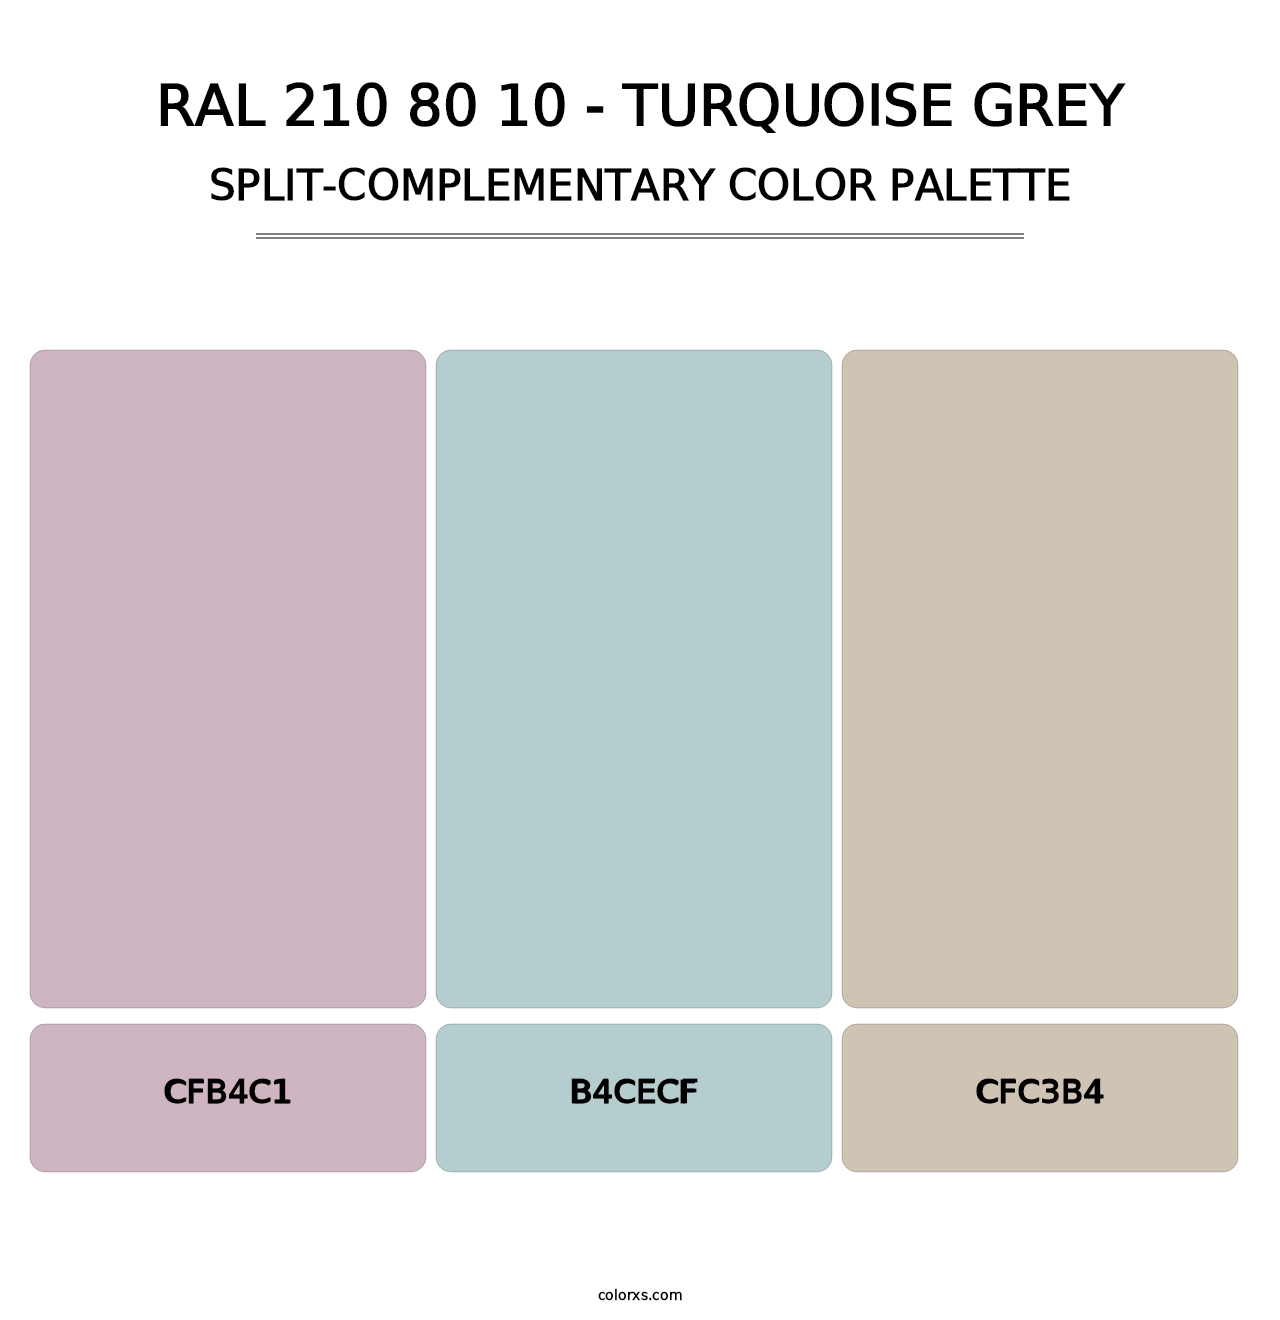 RAL 210 80 10 - Turquoise Grey - Split-Complementary Color Palette